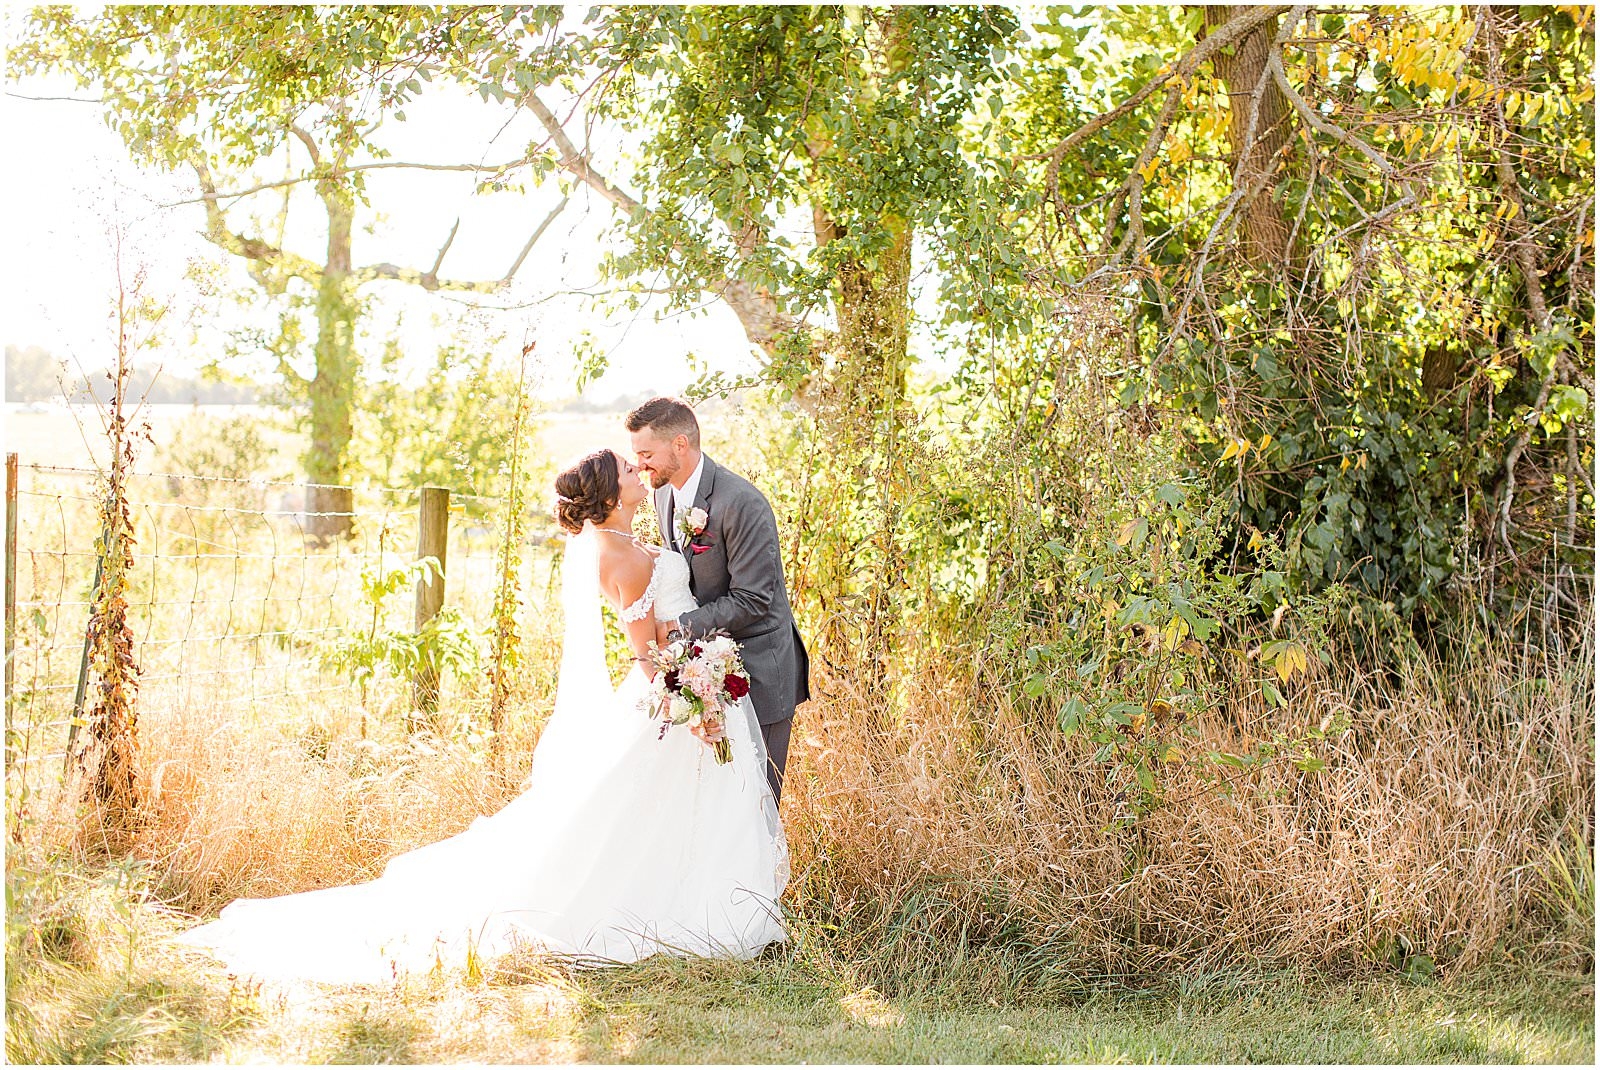 A Stunning Fall Wedding in Indianapolis, IN |. Sally and Andrew | Bret and Brandie Photography 0125.jpg